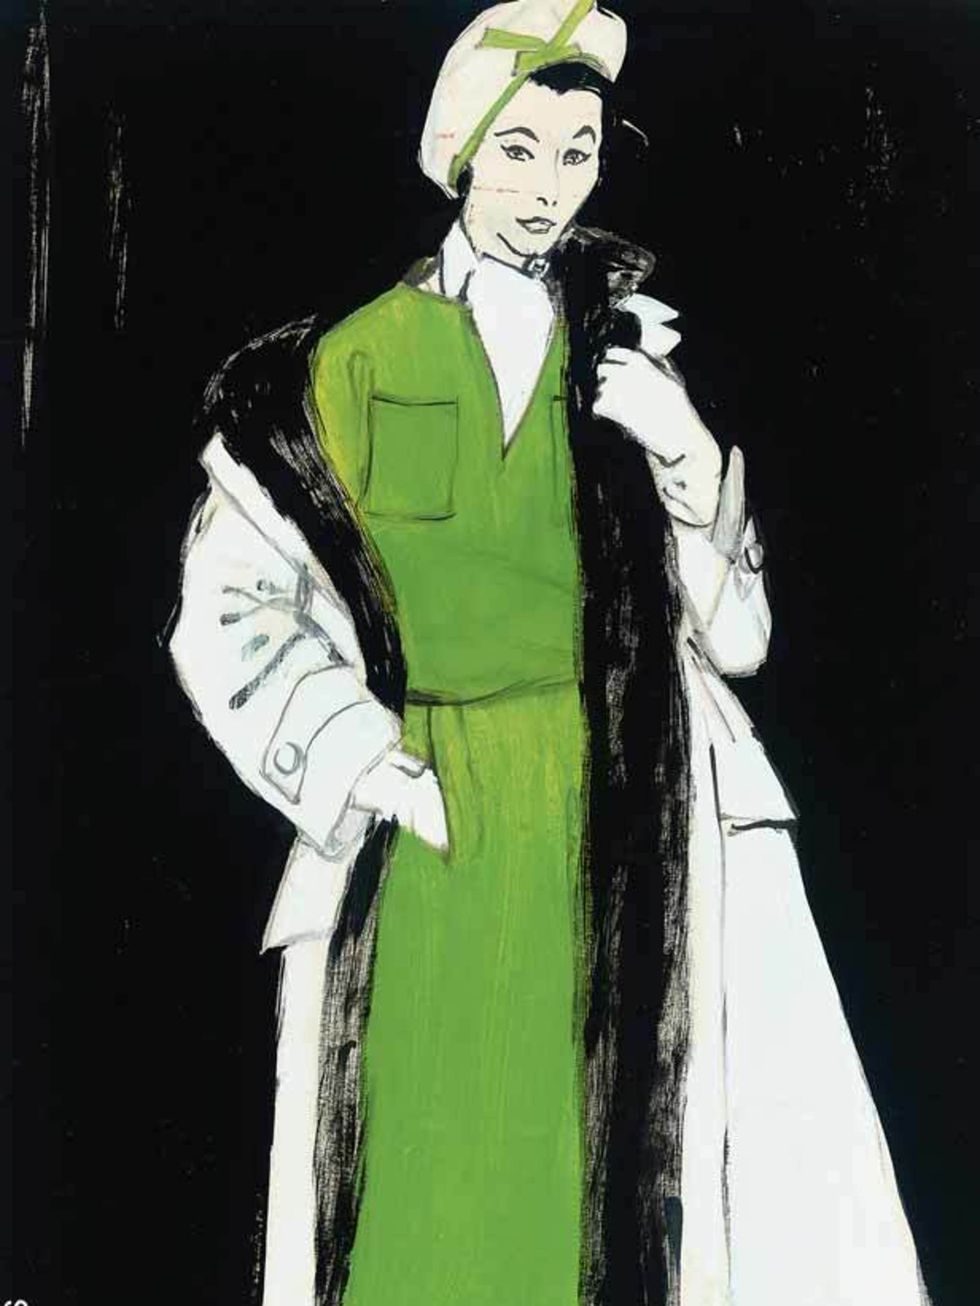 <p>An advertisement for Christian Dior by the renowned illustrator René Gruau (1909-2004), who created some of the most iconic fashion images of the 20th century.</p>